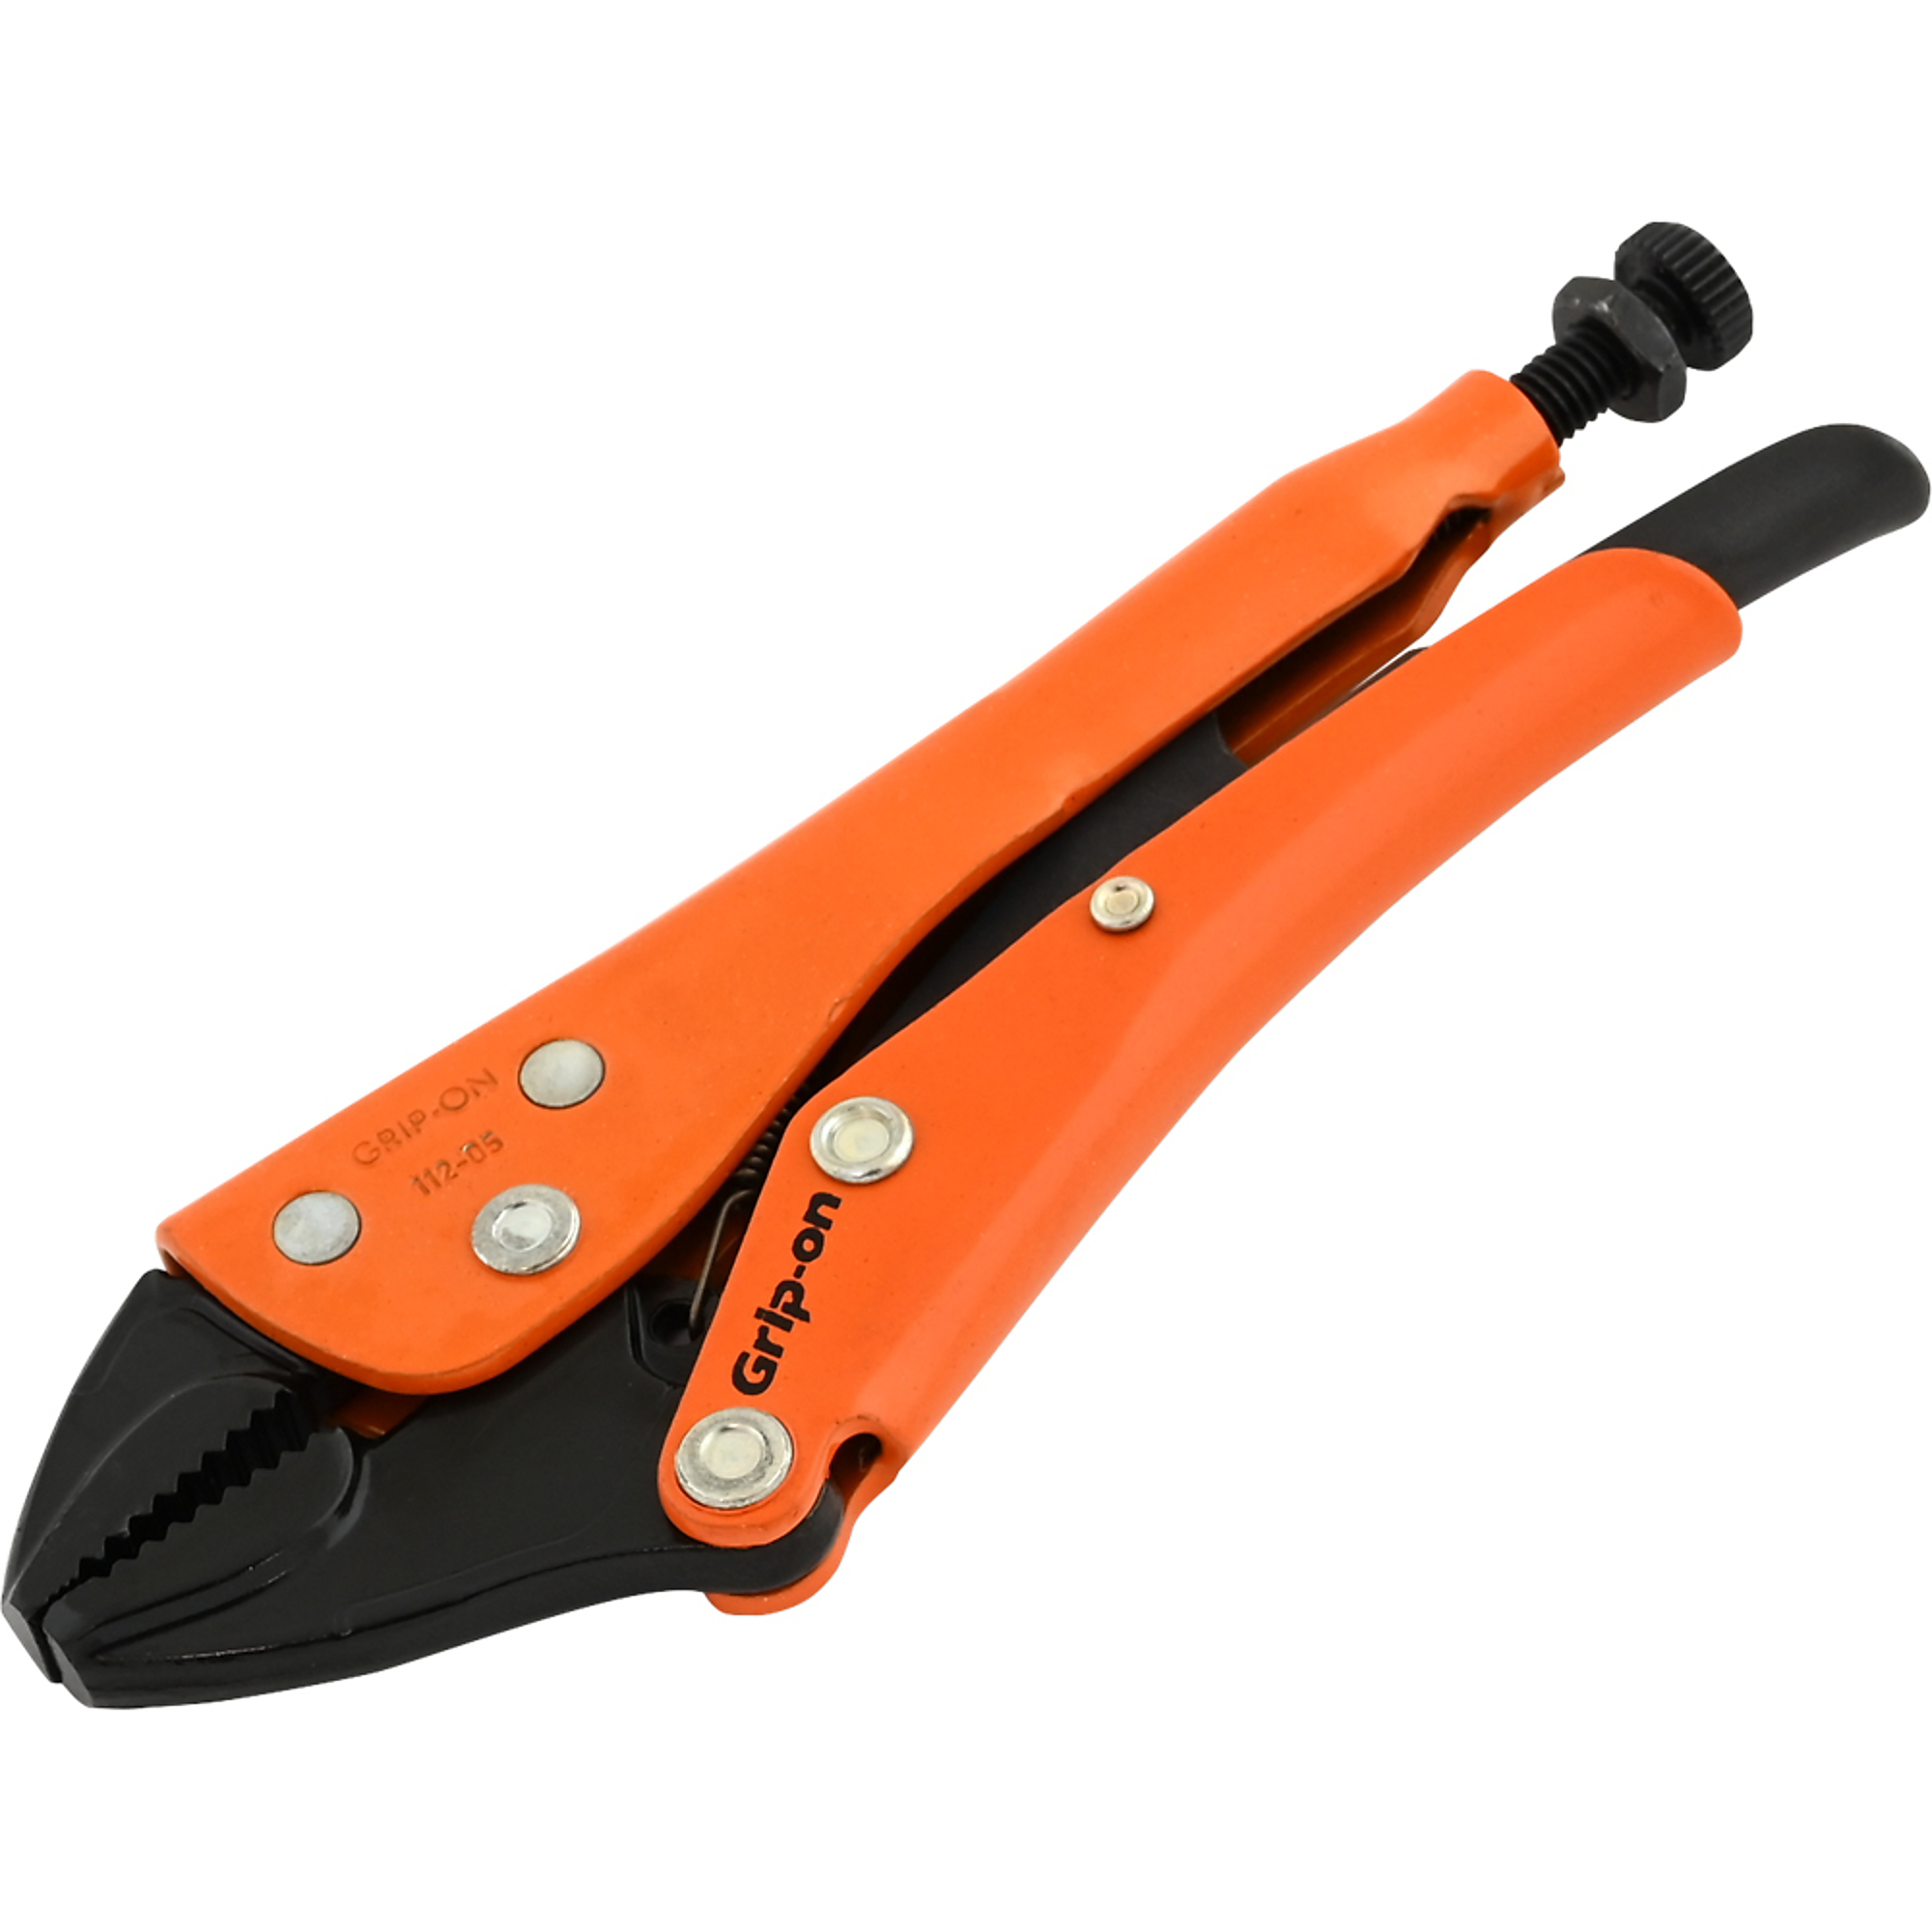 Grip-on, 5Inch Locking Pliers Straight Jaws, Pieces (qty.) 1 Material Alloy Steel, Jaw Capacity 1.26 in, Model 112-05